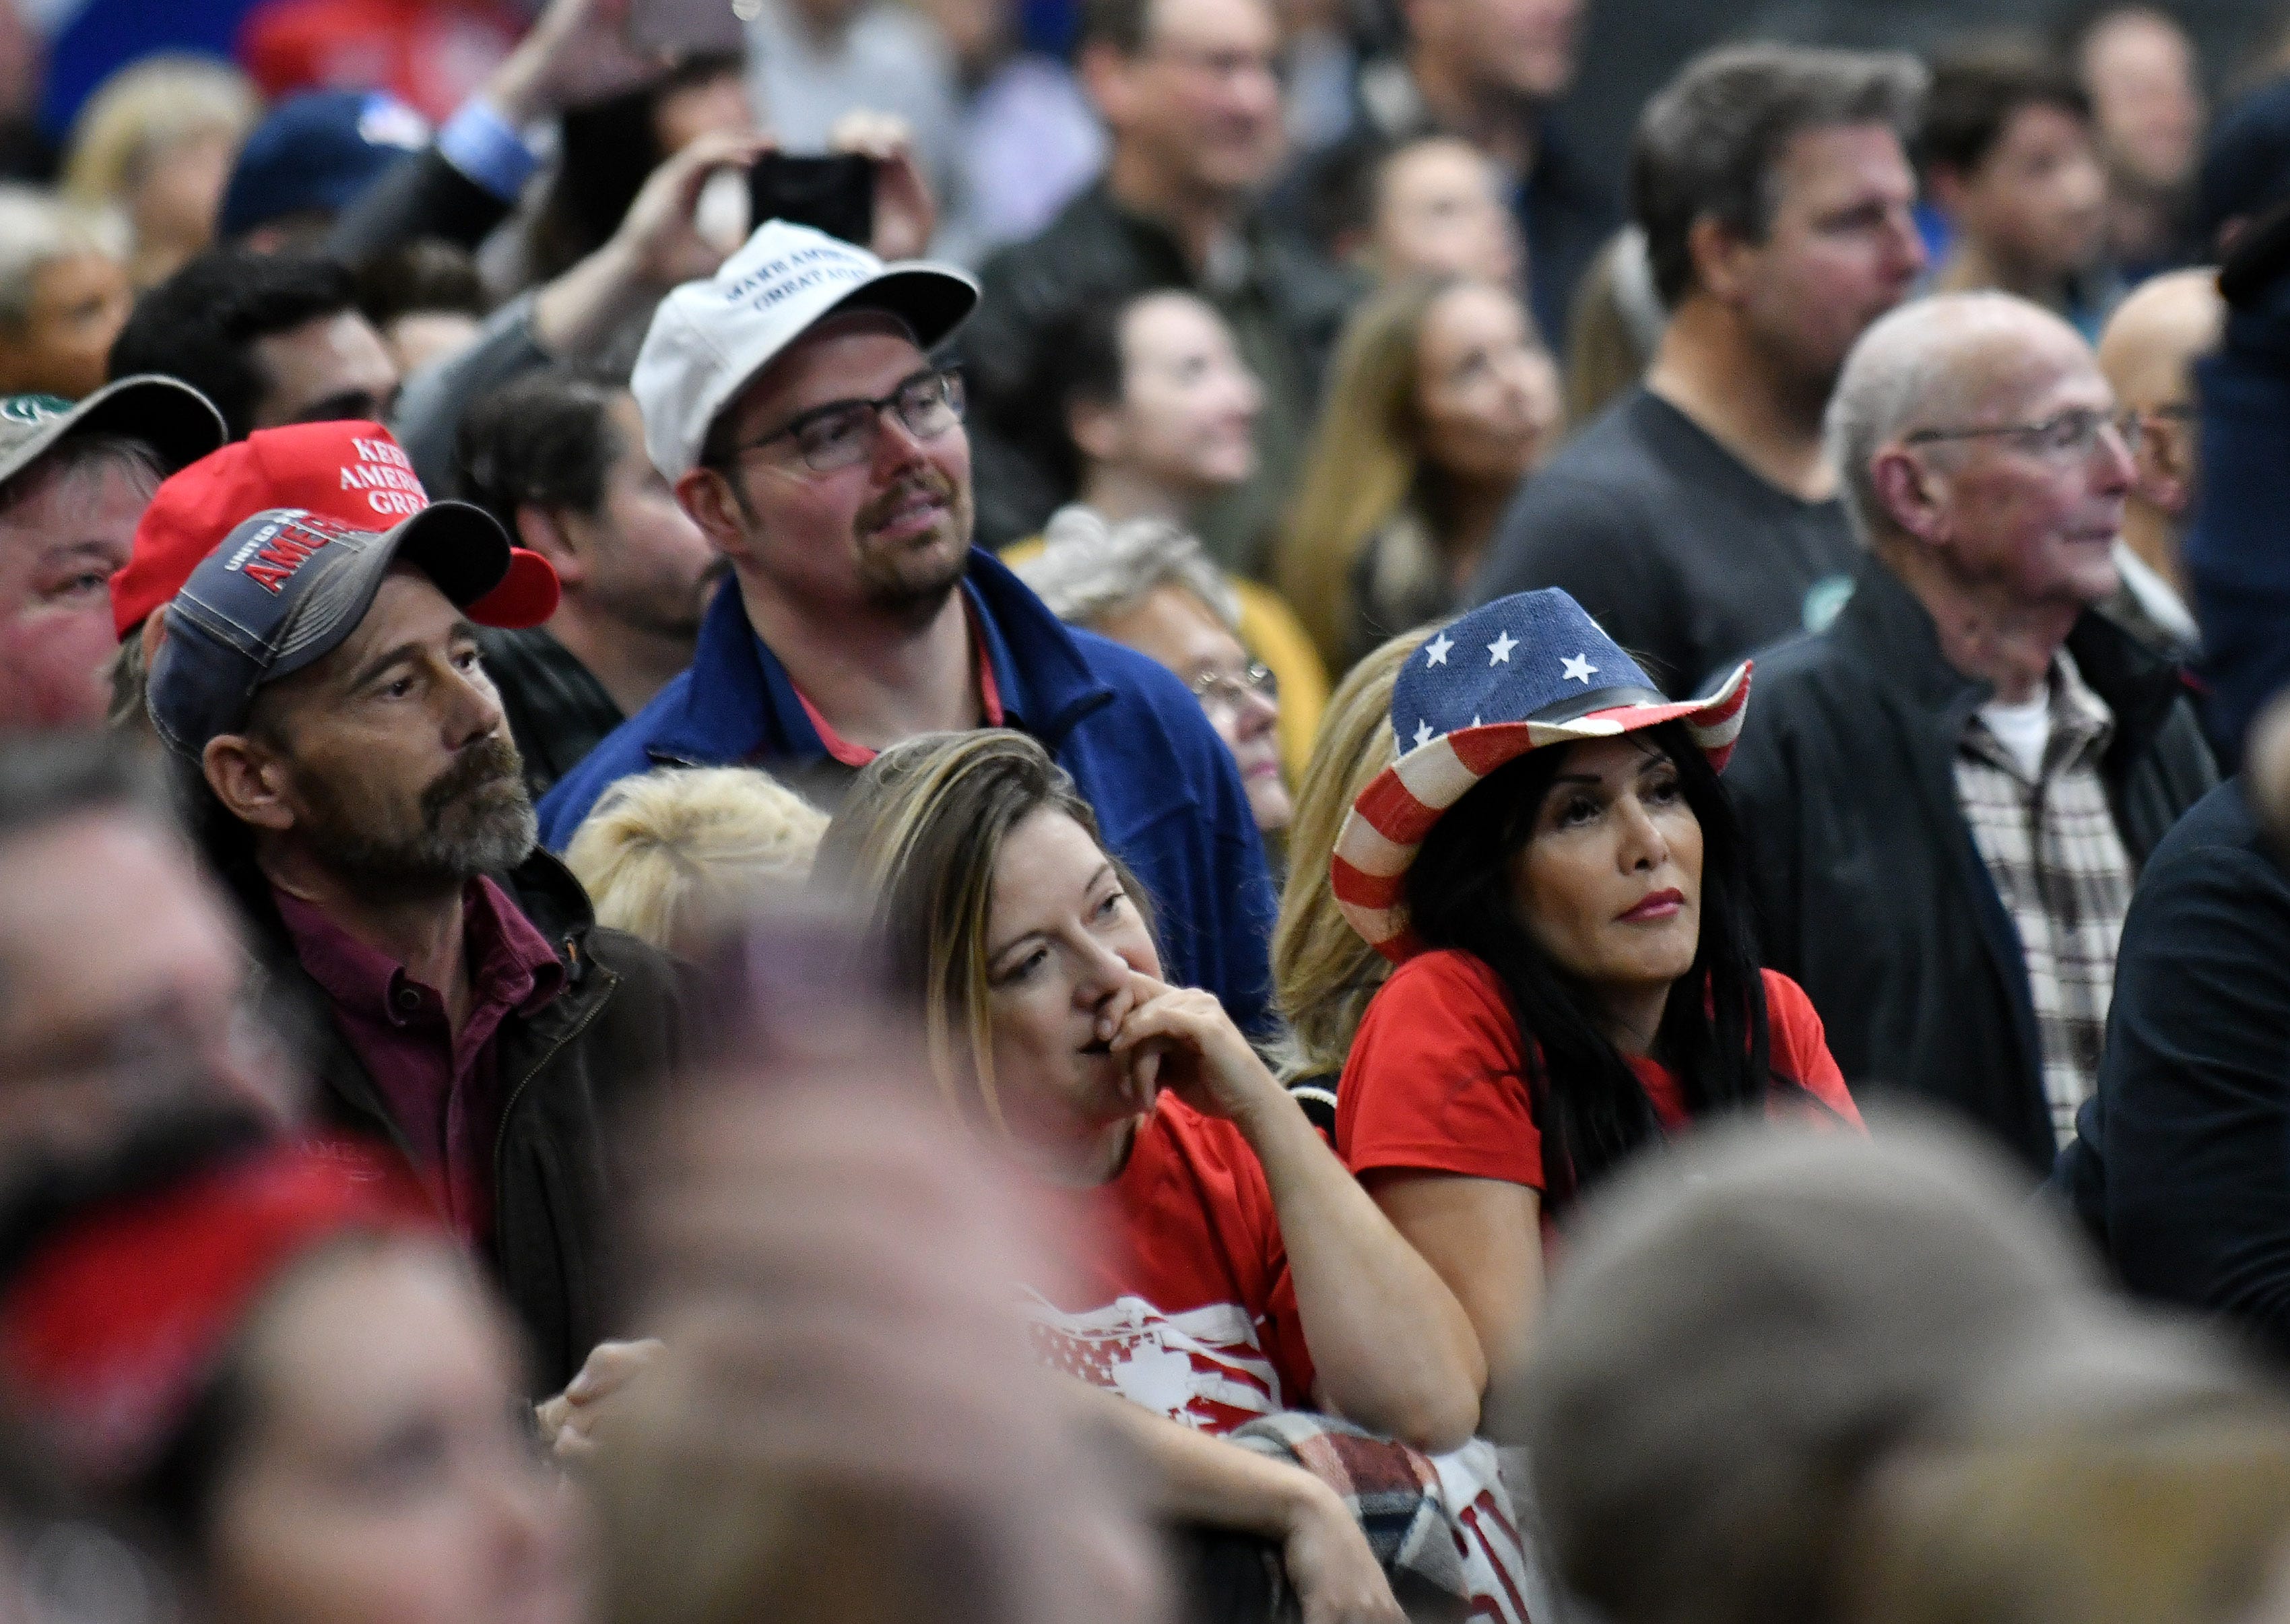 Supporters listen to Ted Nugent during the rally.